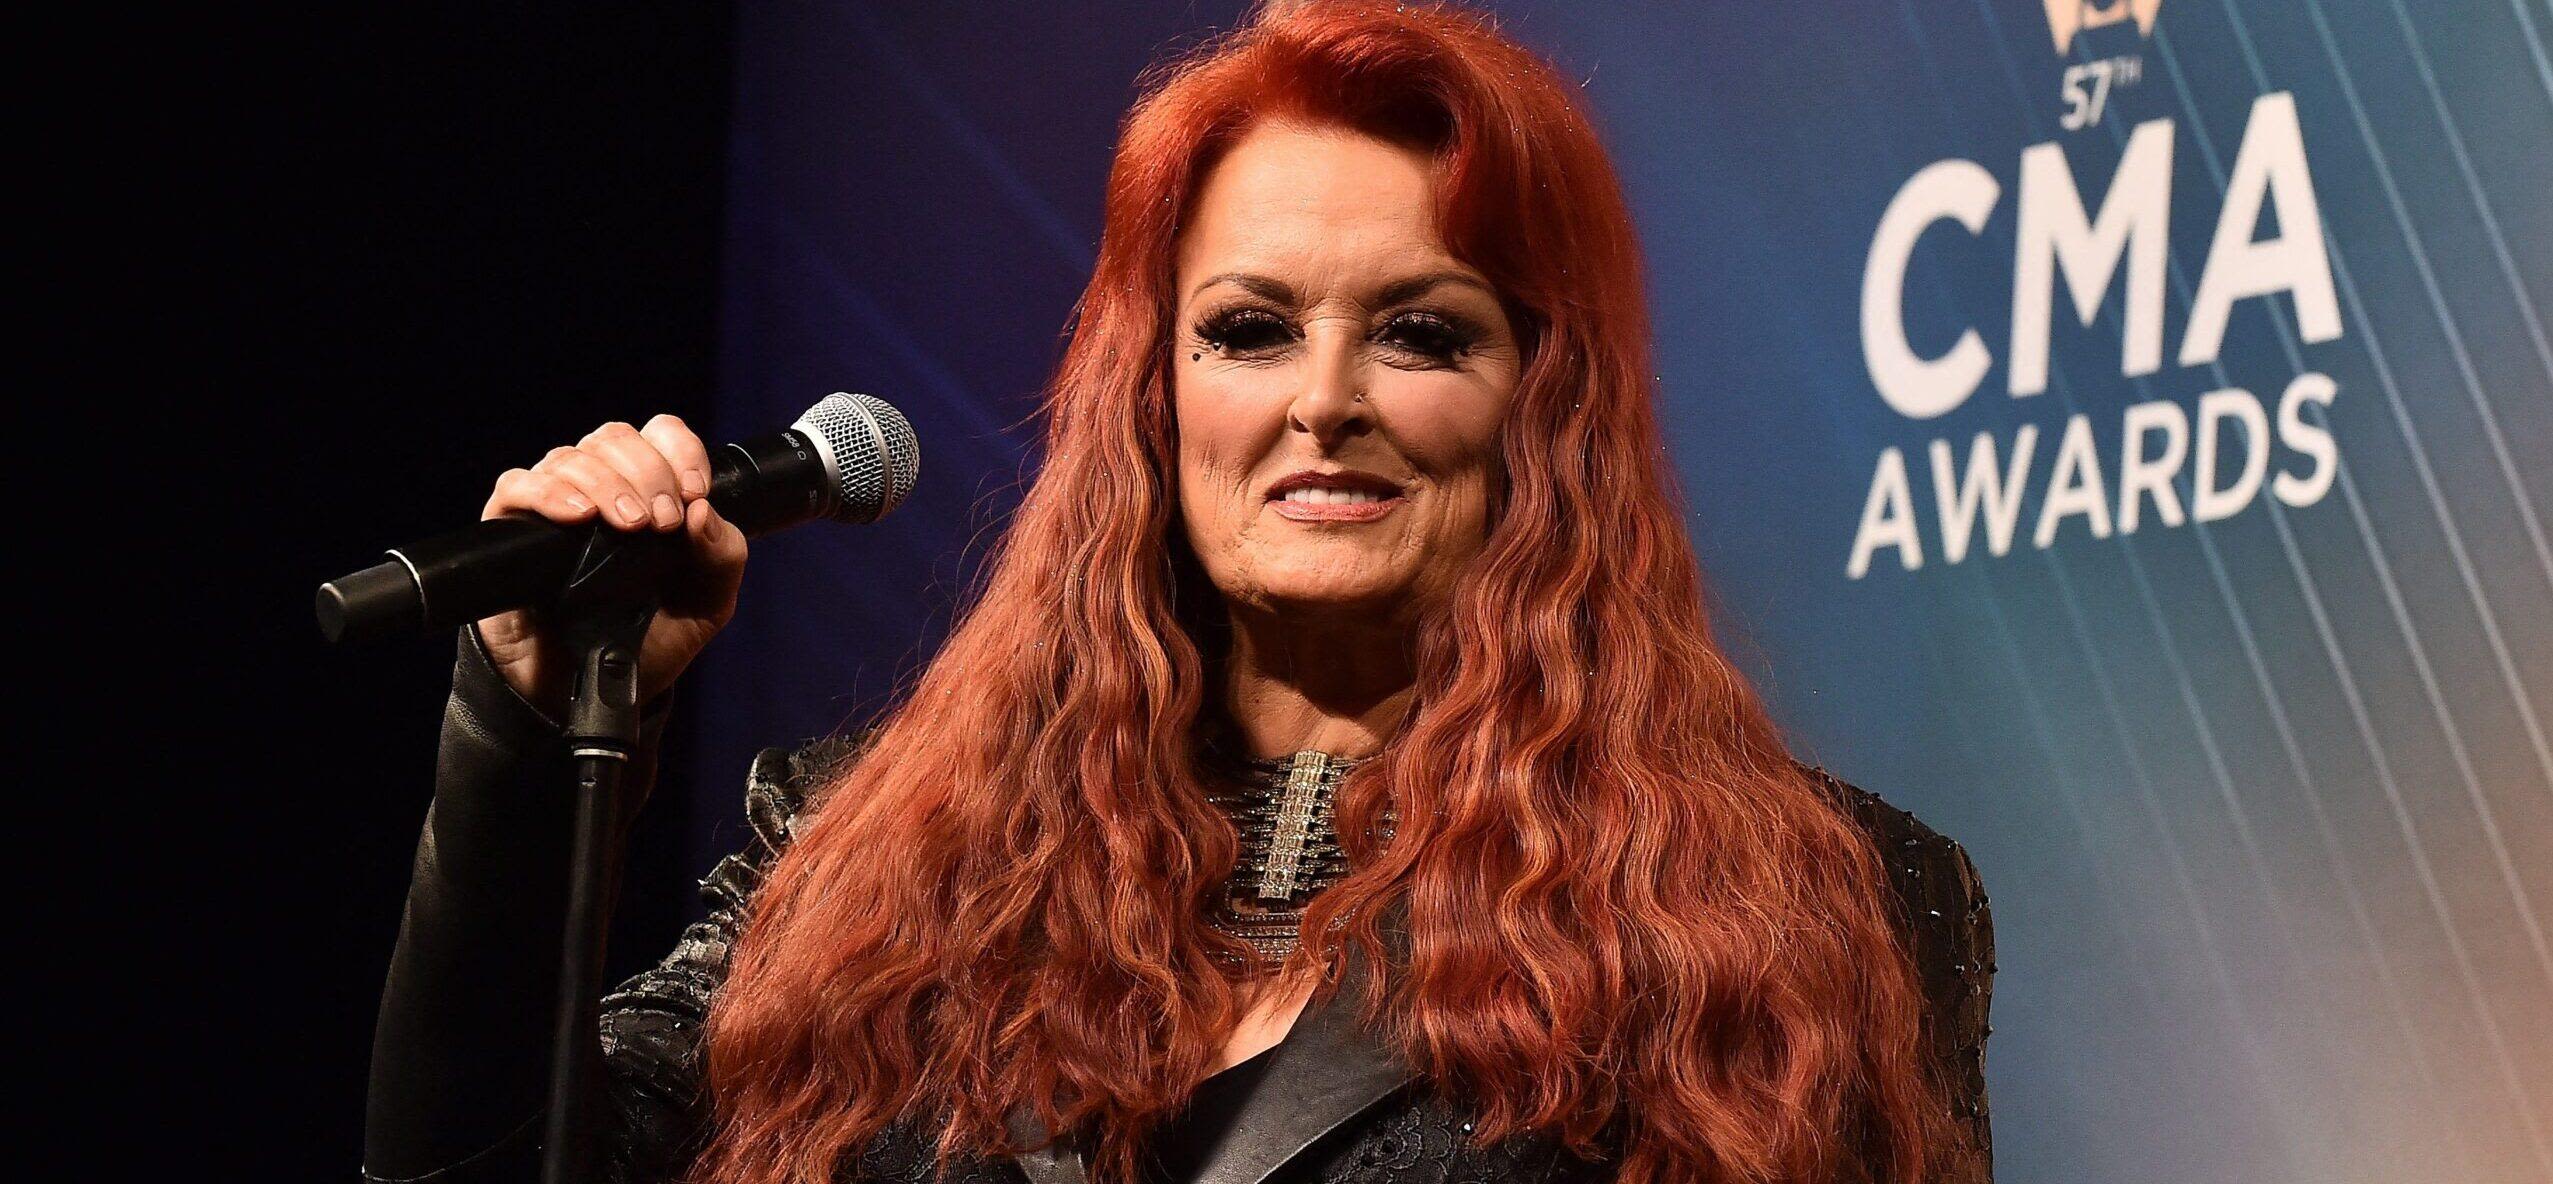 Wynonna Judd's Daughter Regained Freedom Early After Exposure Arrest